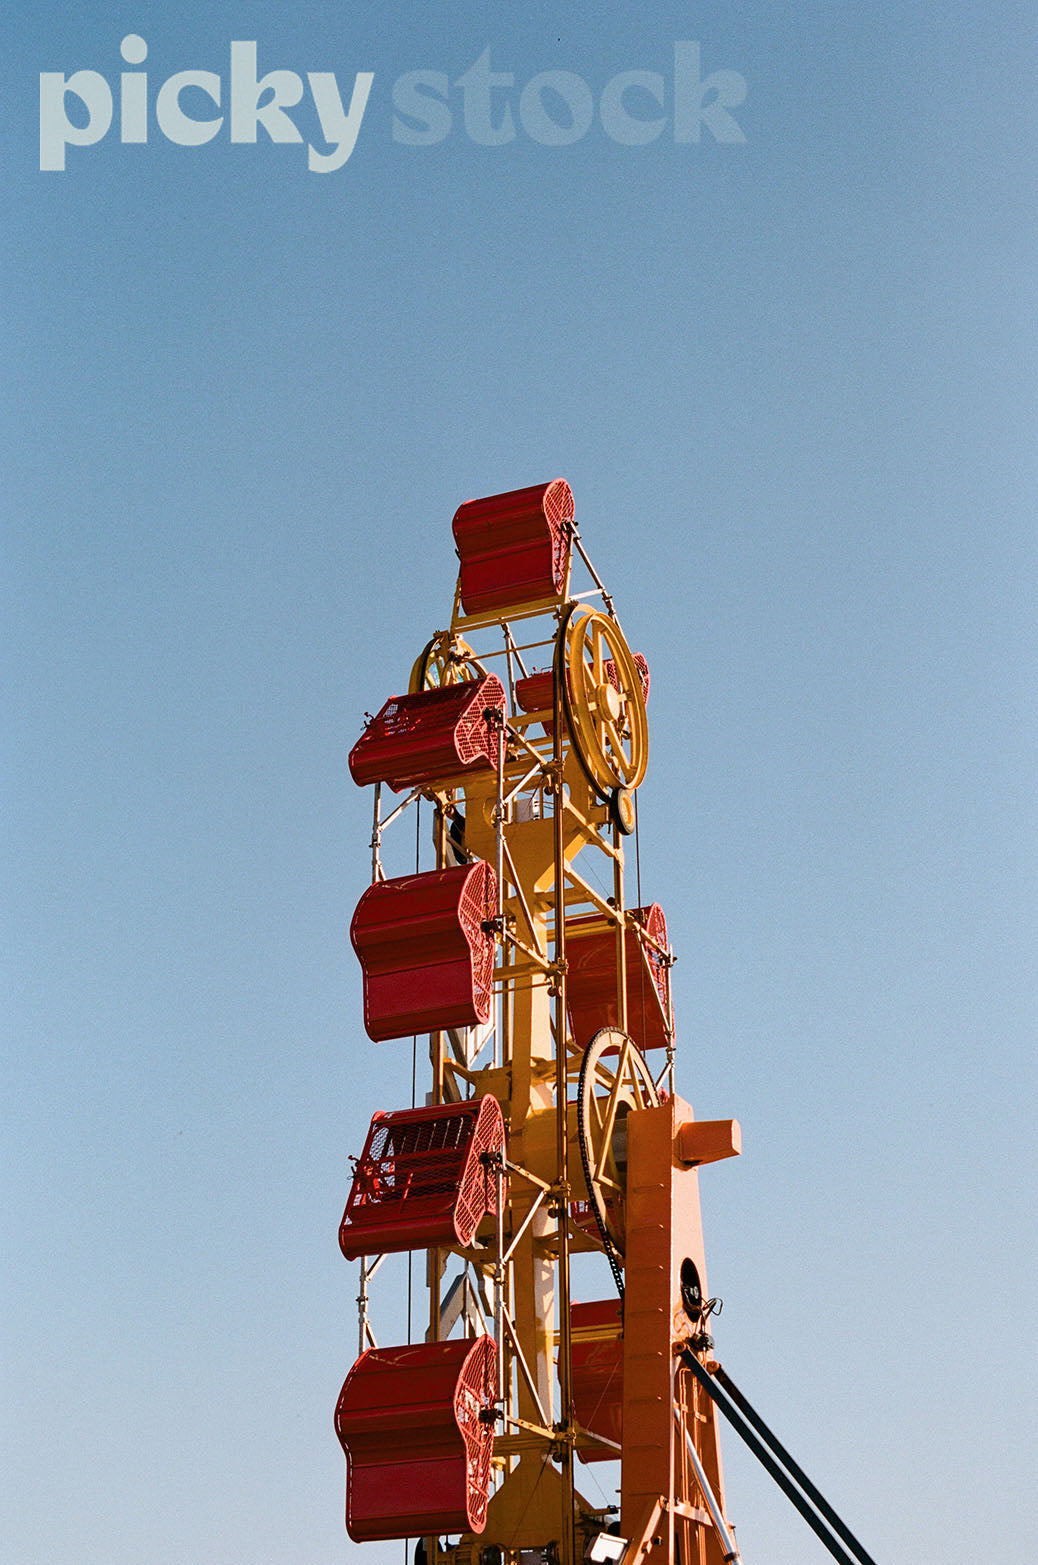 Blue, cloudless sky. Close up of theme park ride. With red carts, with yellow base.